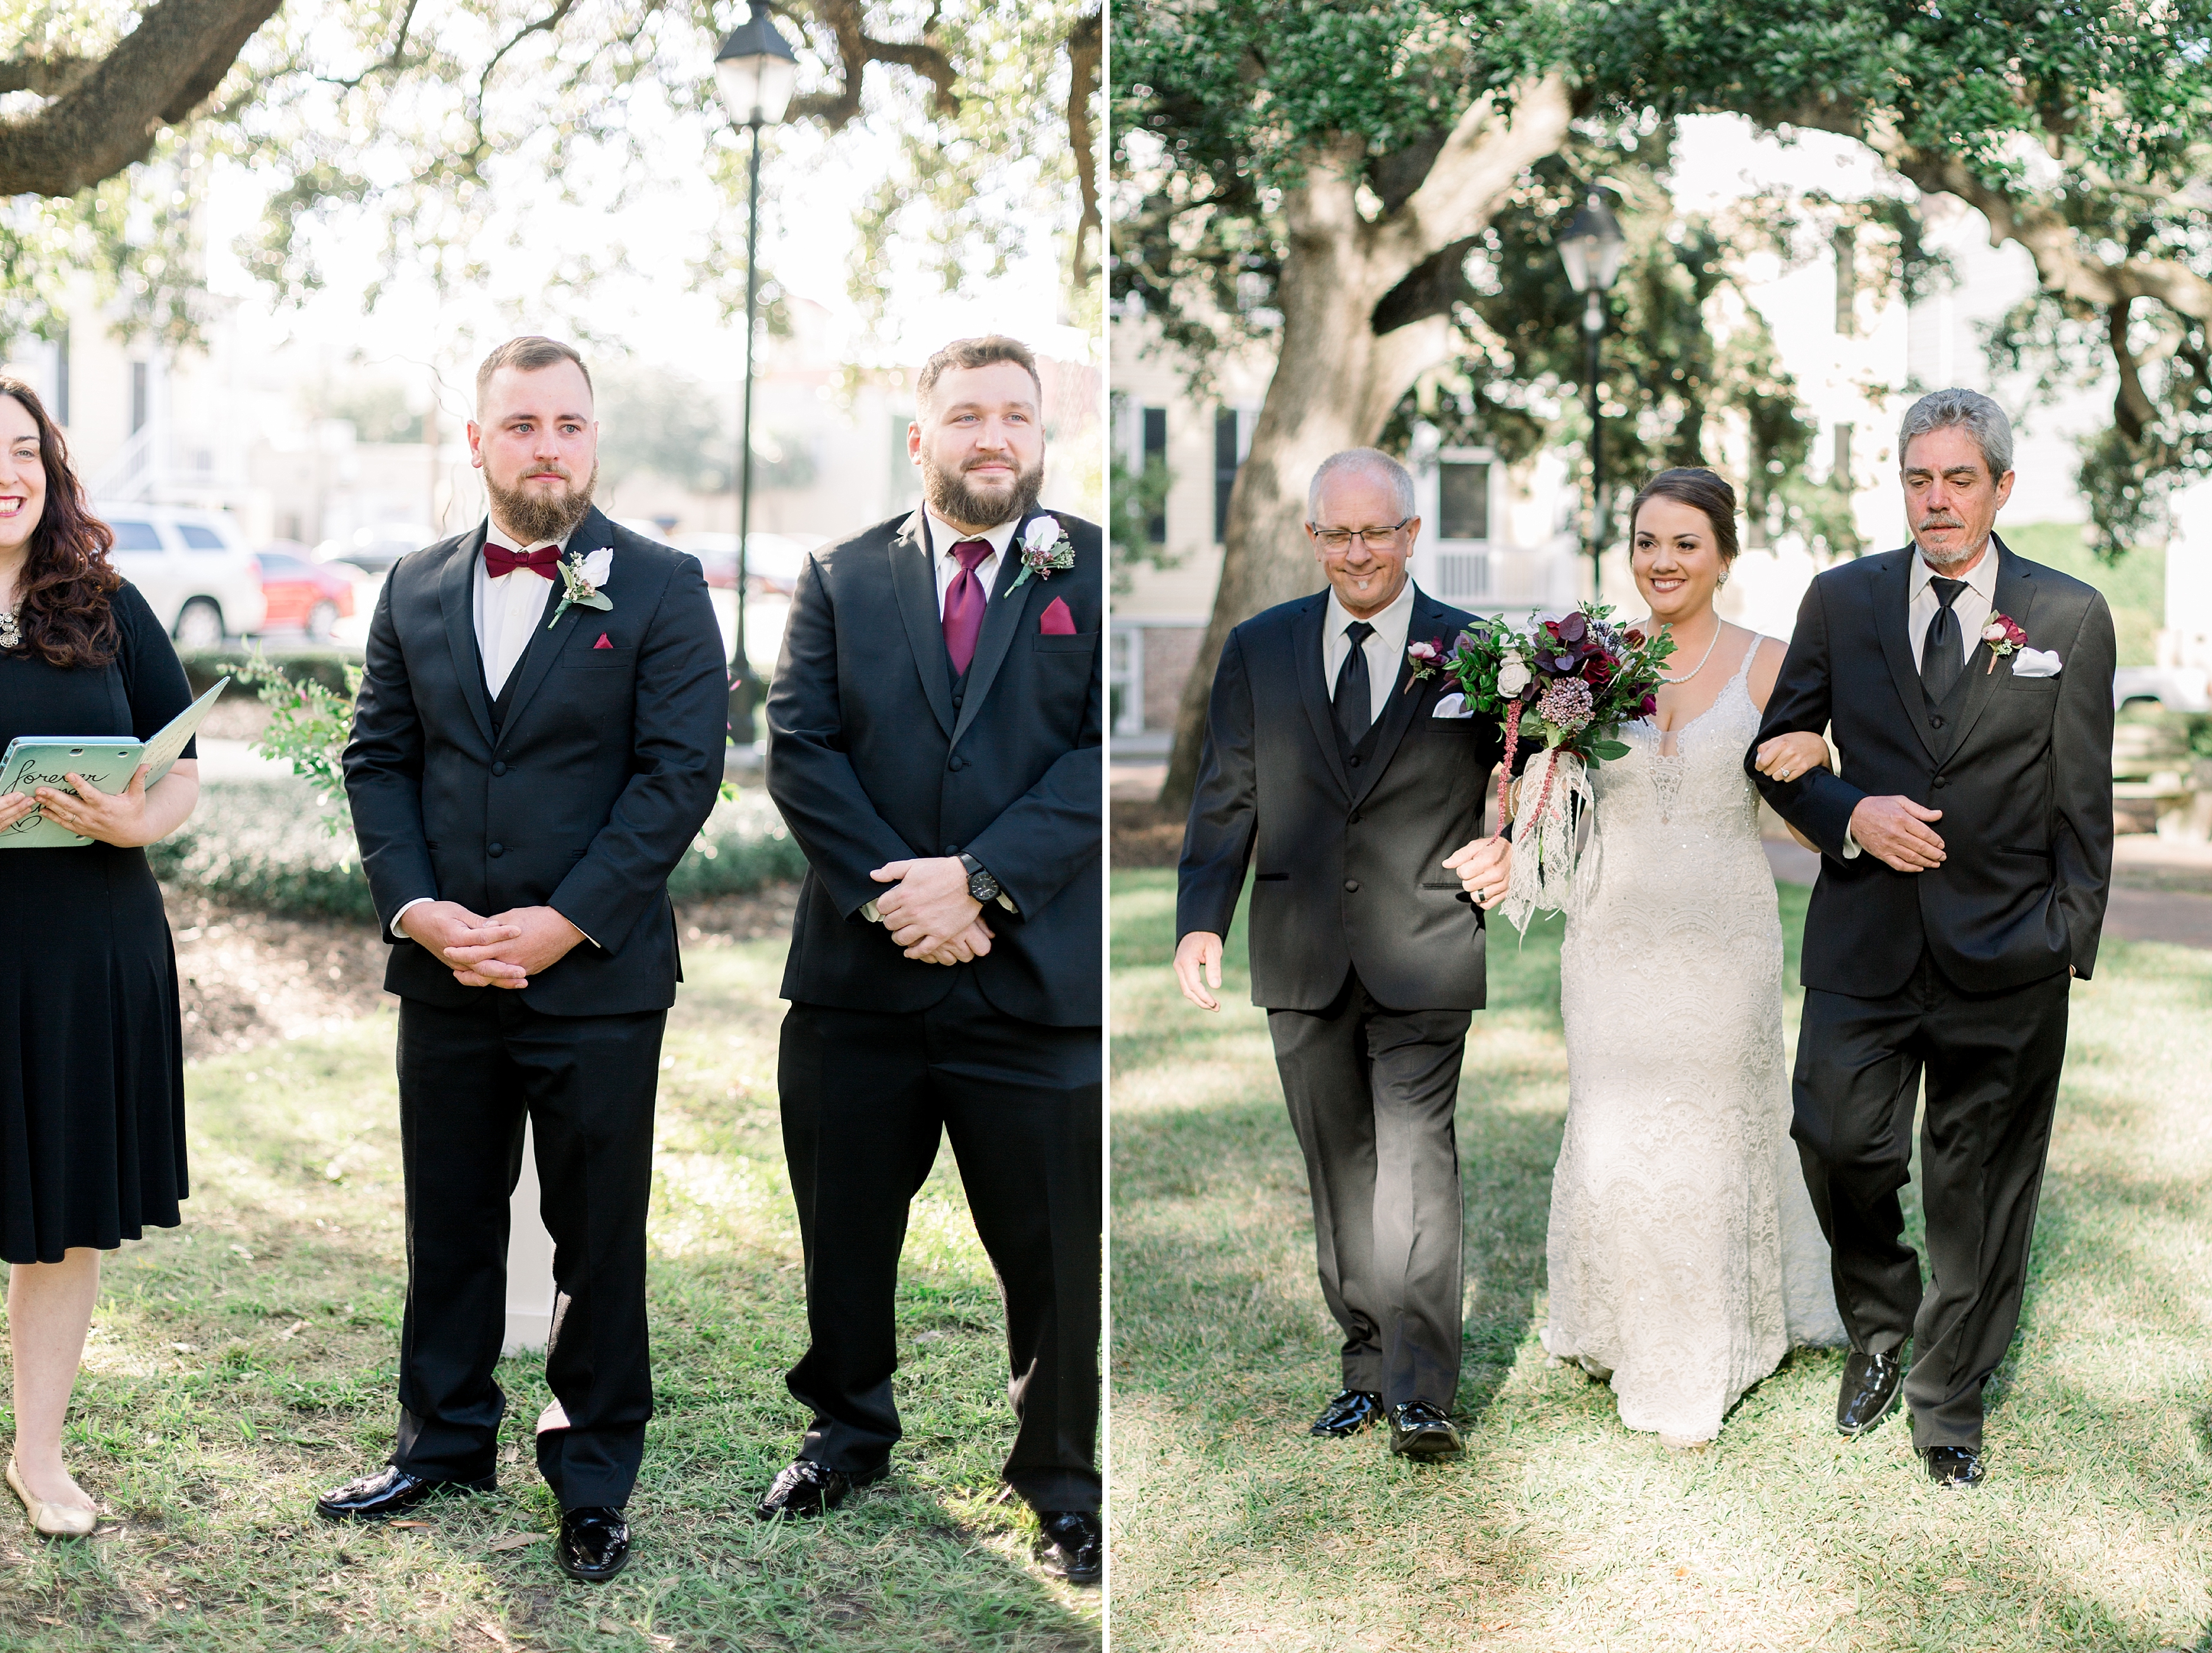 Groom sees bride for first time coming down the aisle.